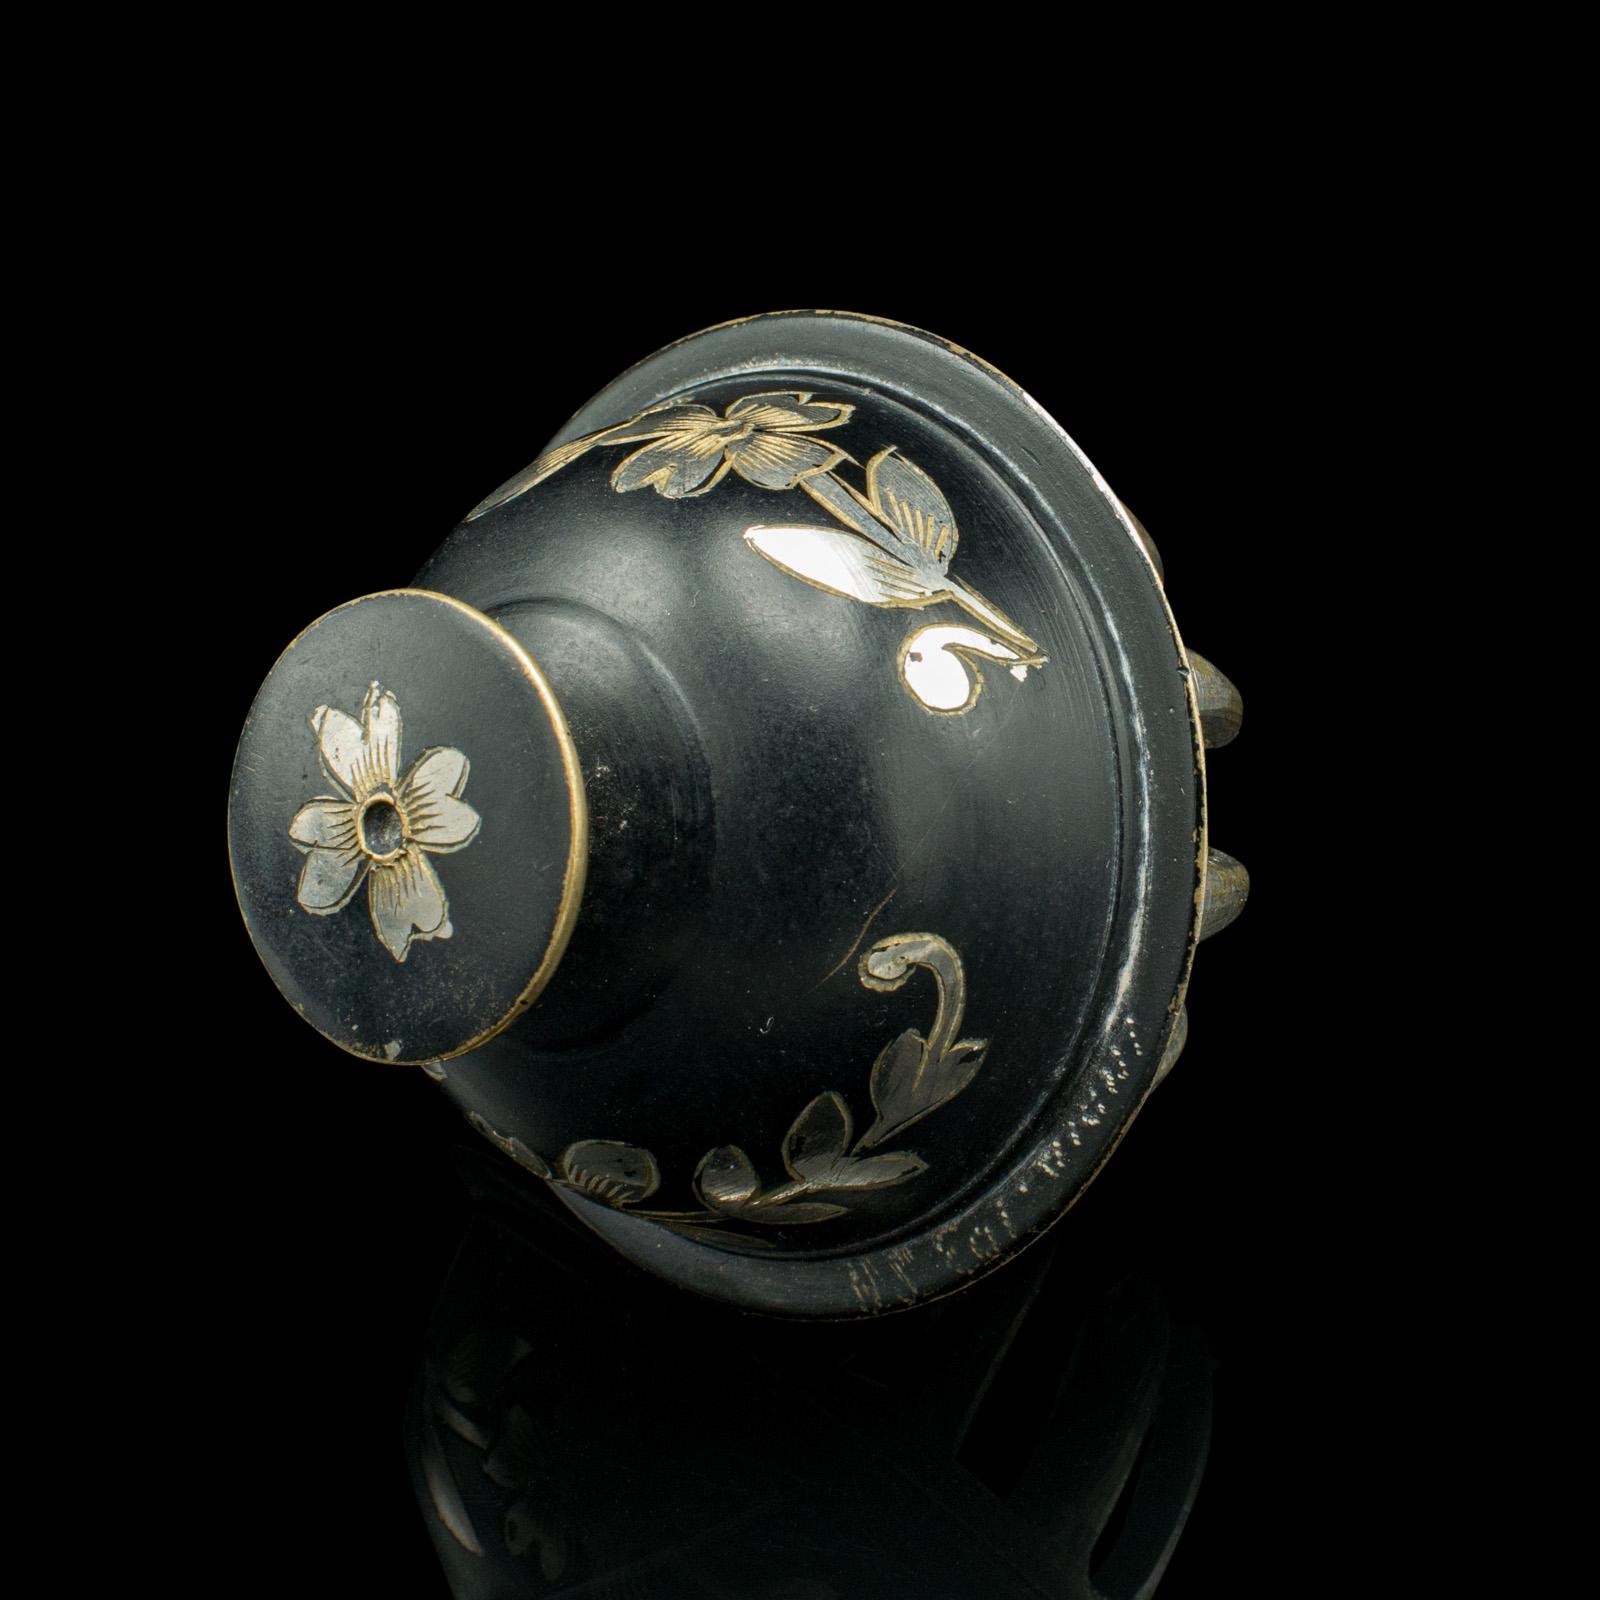 Antique Tea Calling Bell, Japanese, Brass, Silver Plate, Decorative, Circa 1920 For Sale 4